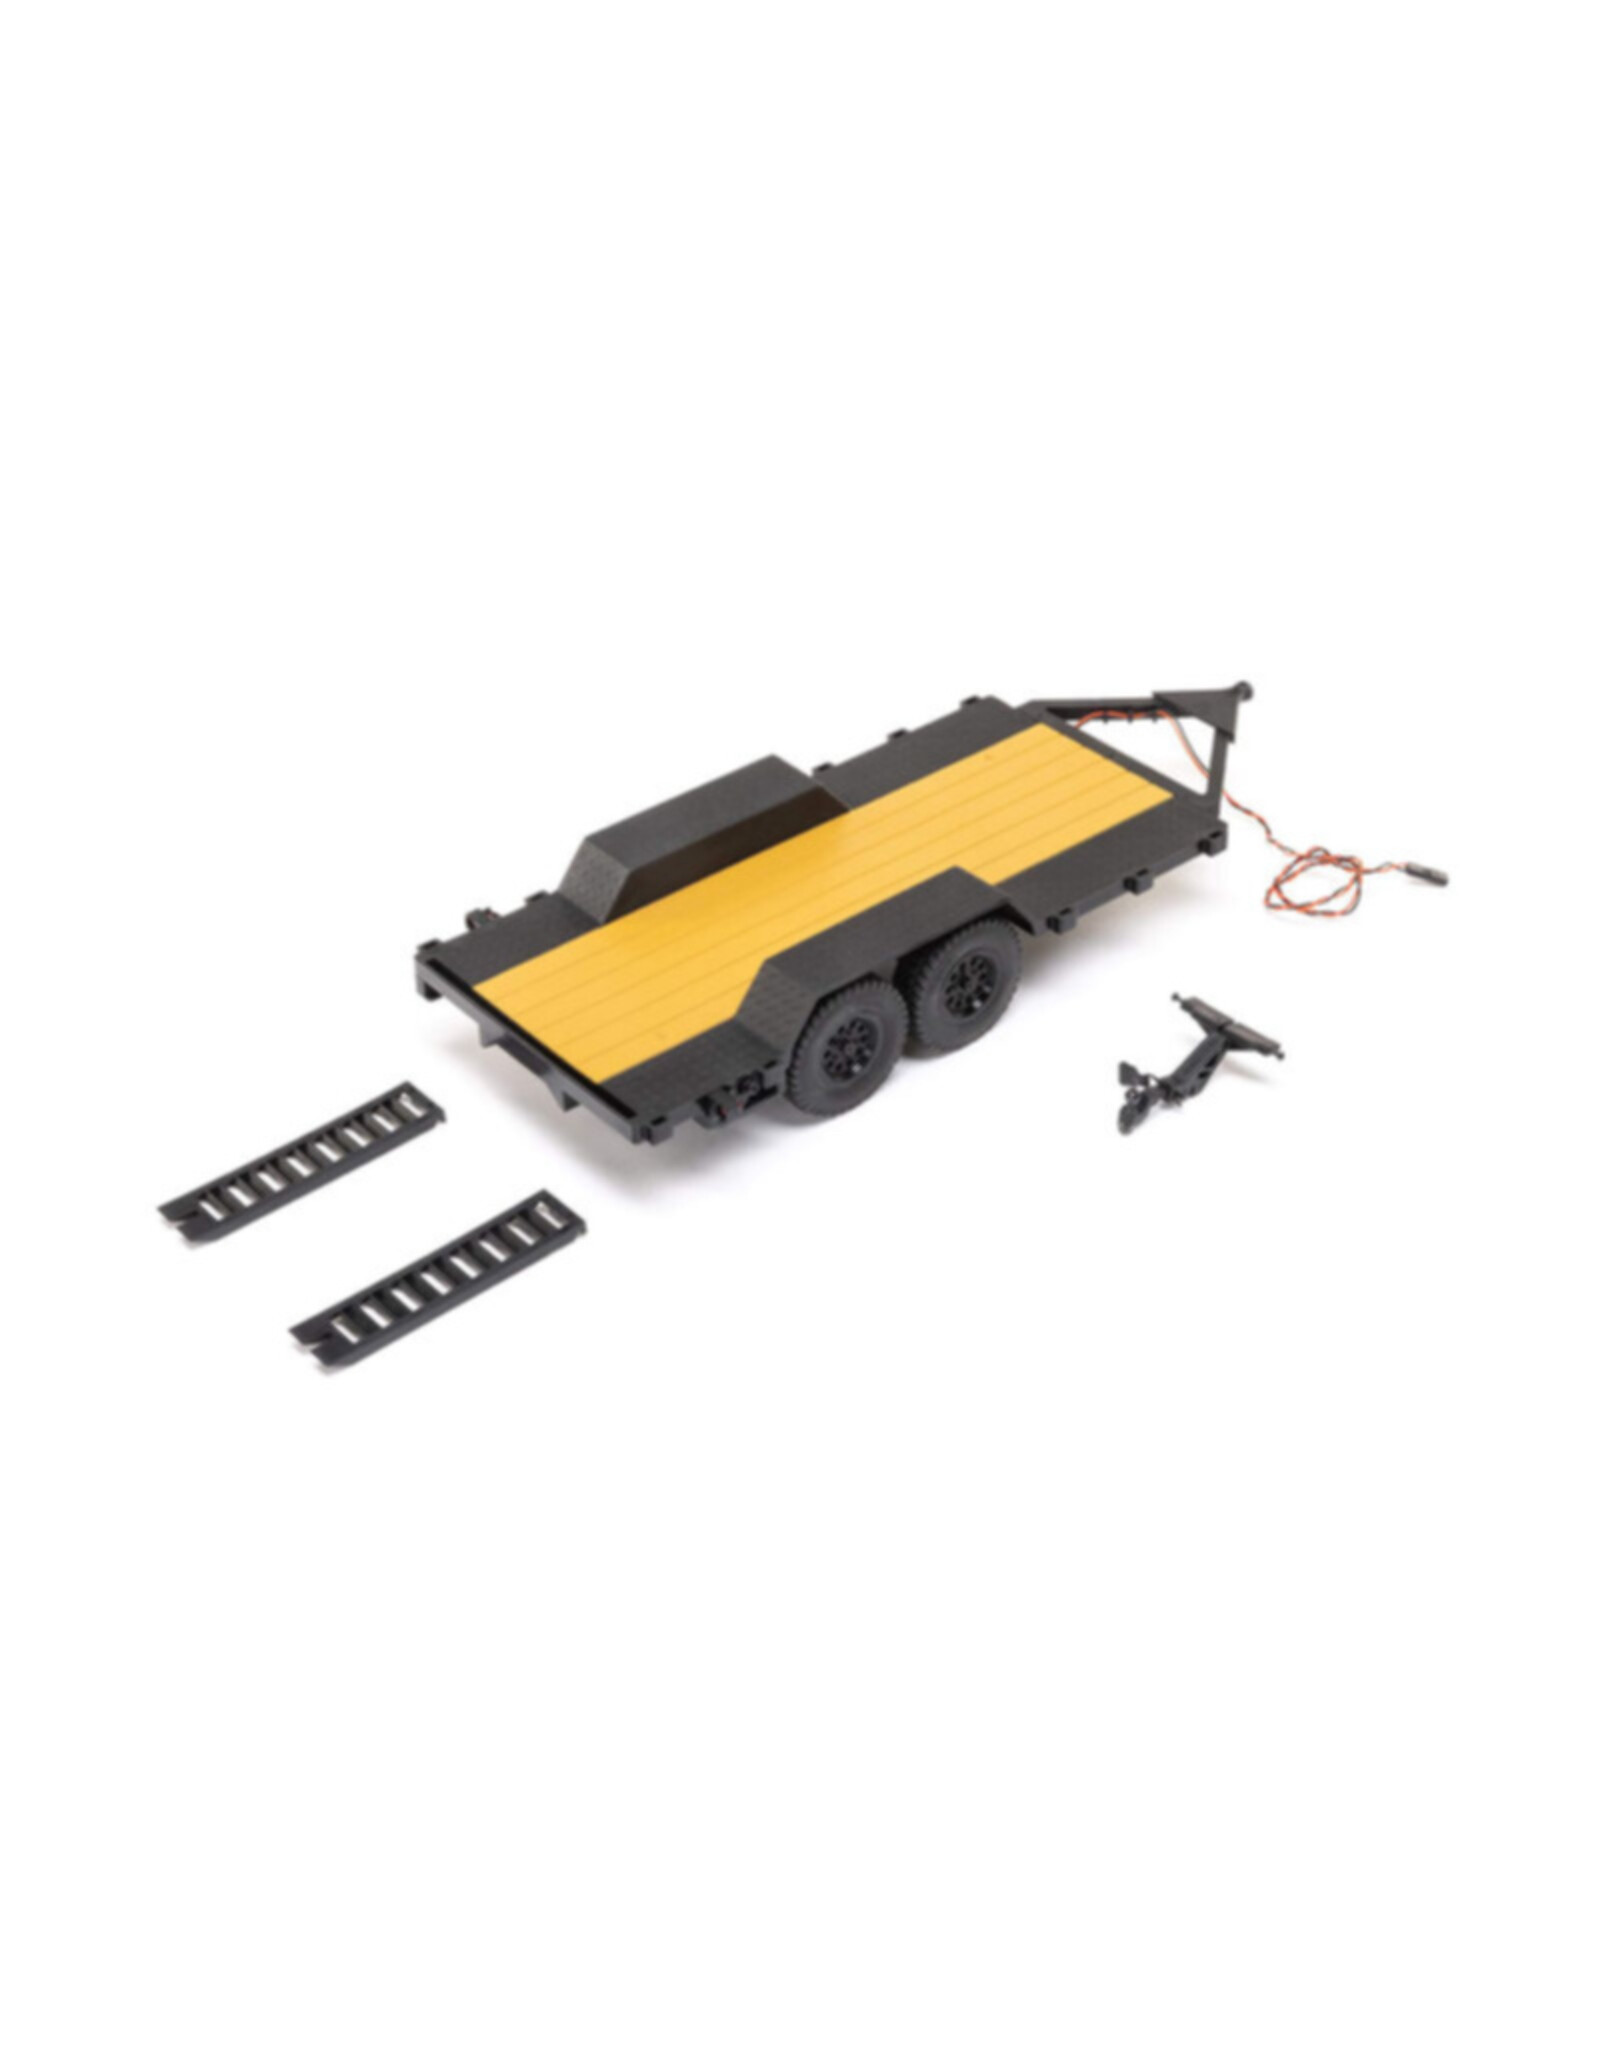 Axial AXI00009 SCX24 Flat Bed Vehicle Trailer with LED Taillights:1/24th